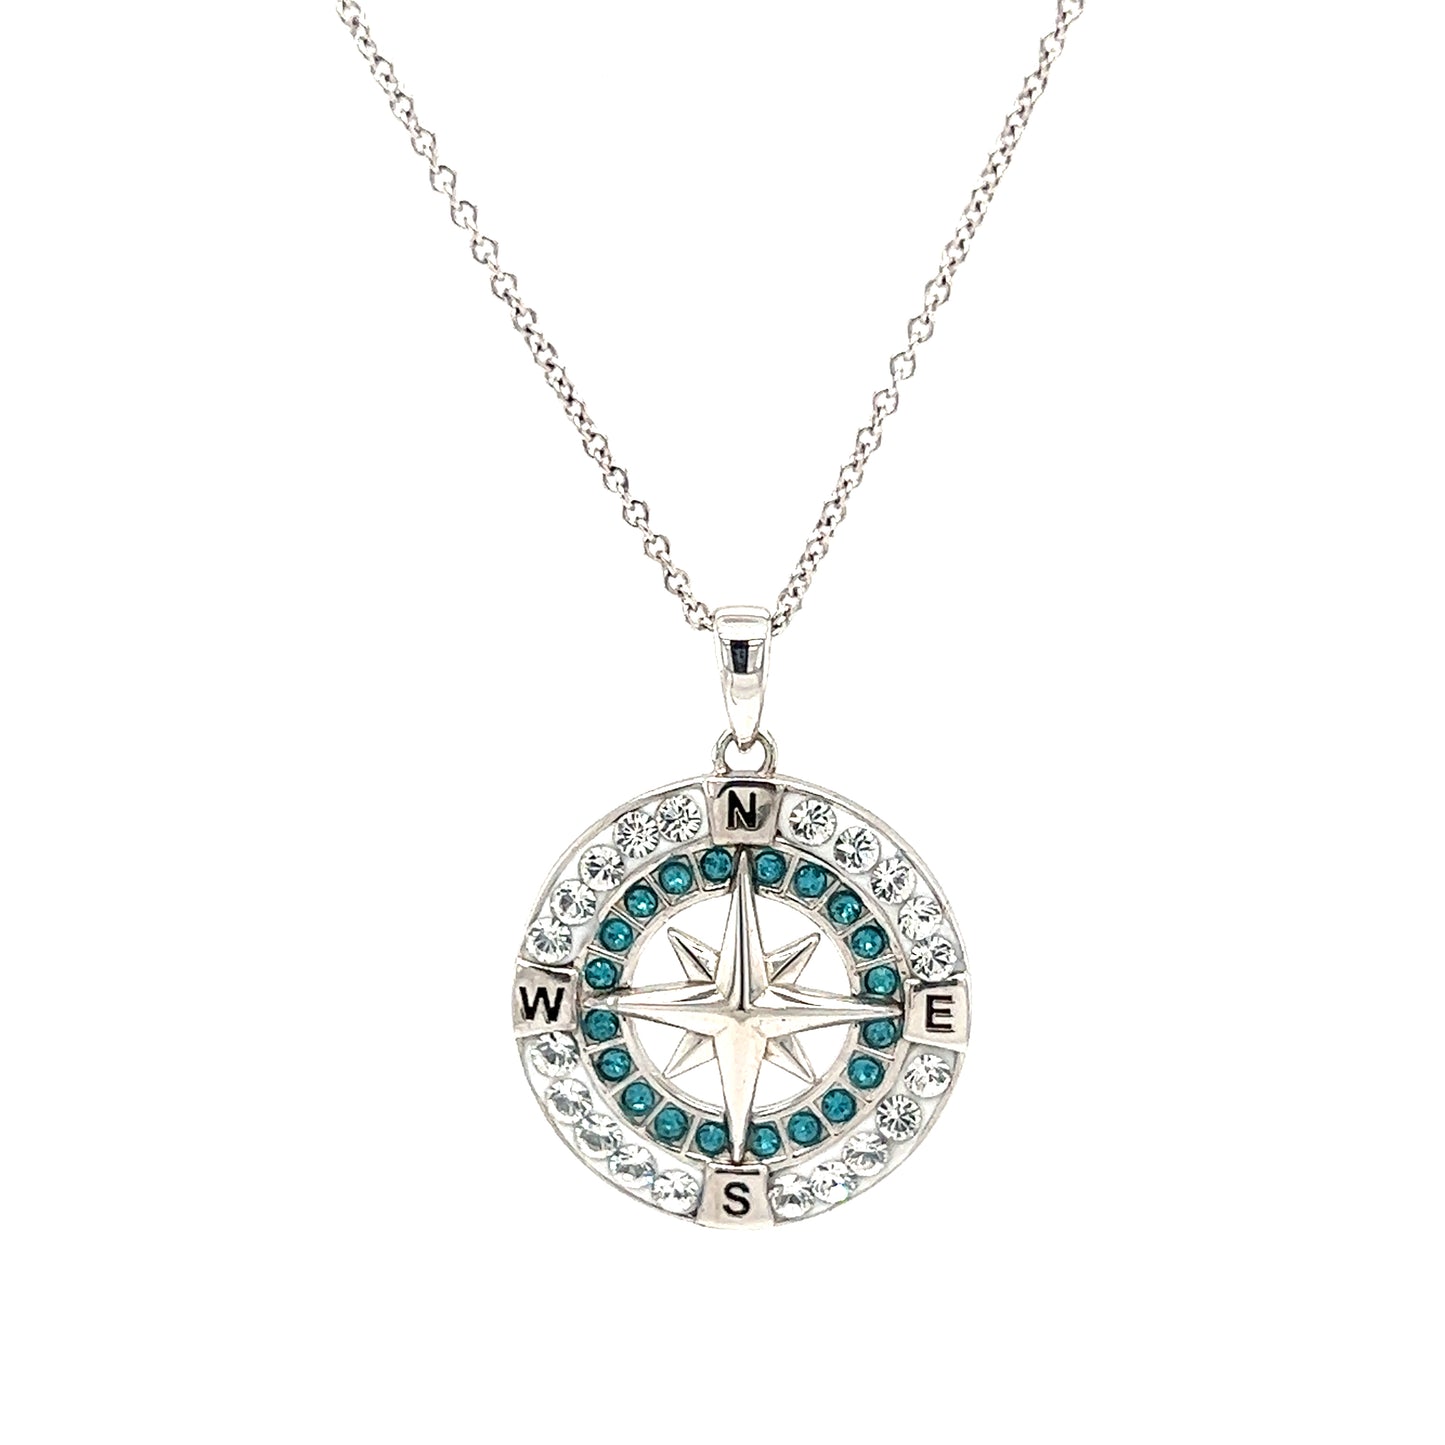 Compass Necklace with Aqua and White Crystals in Sterling Silver Front Necklace View 3